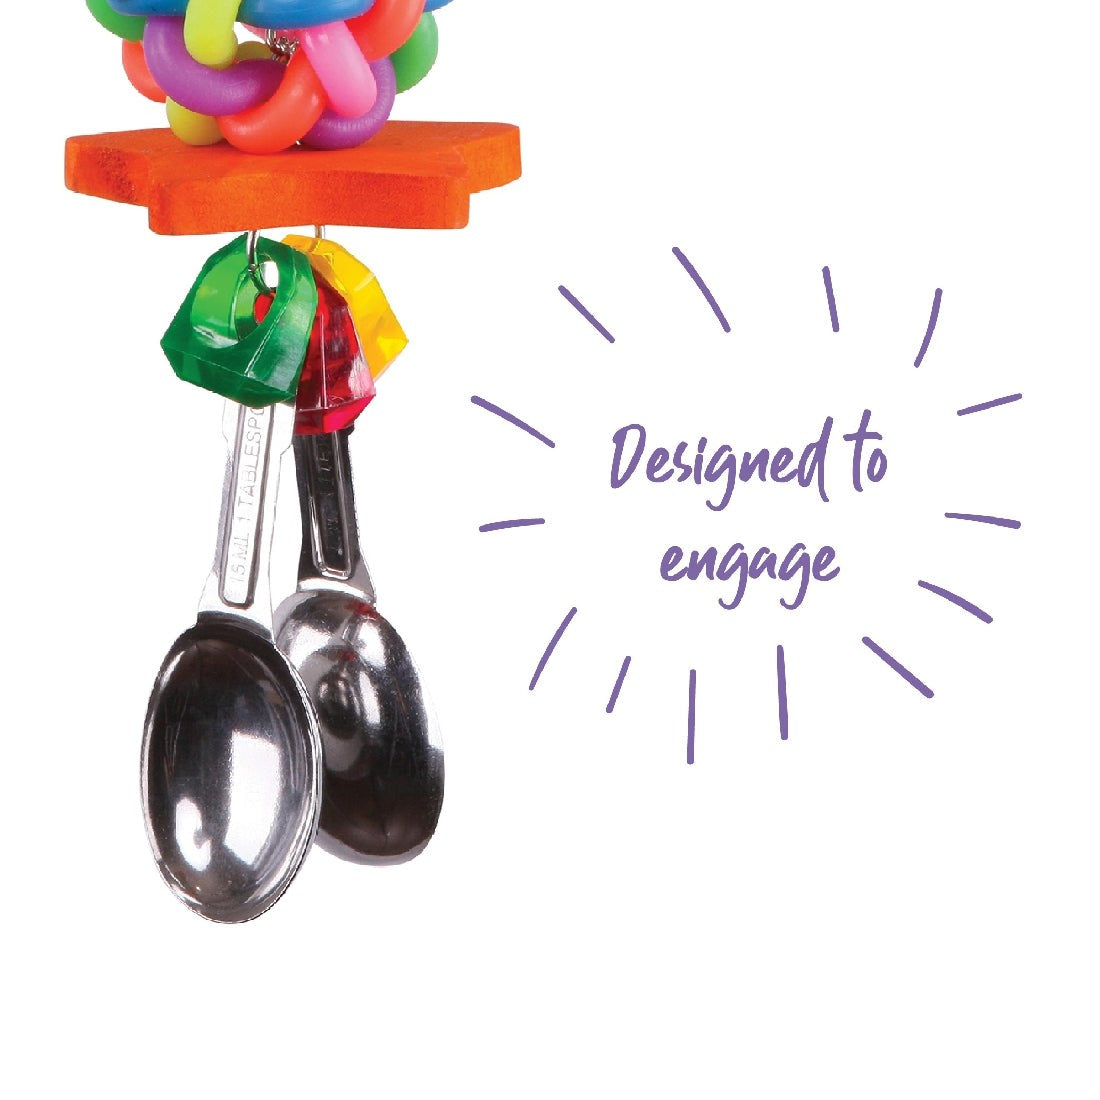 Colorful bird toy with spoons and beads, text "Designed to engage".